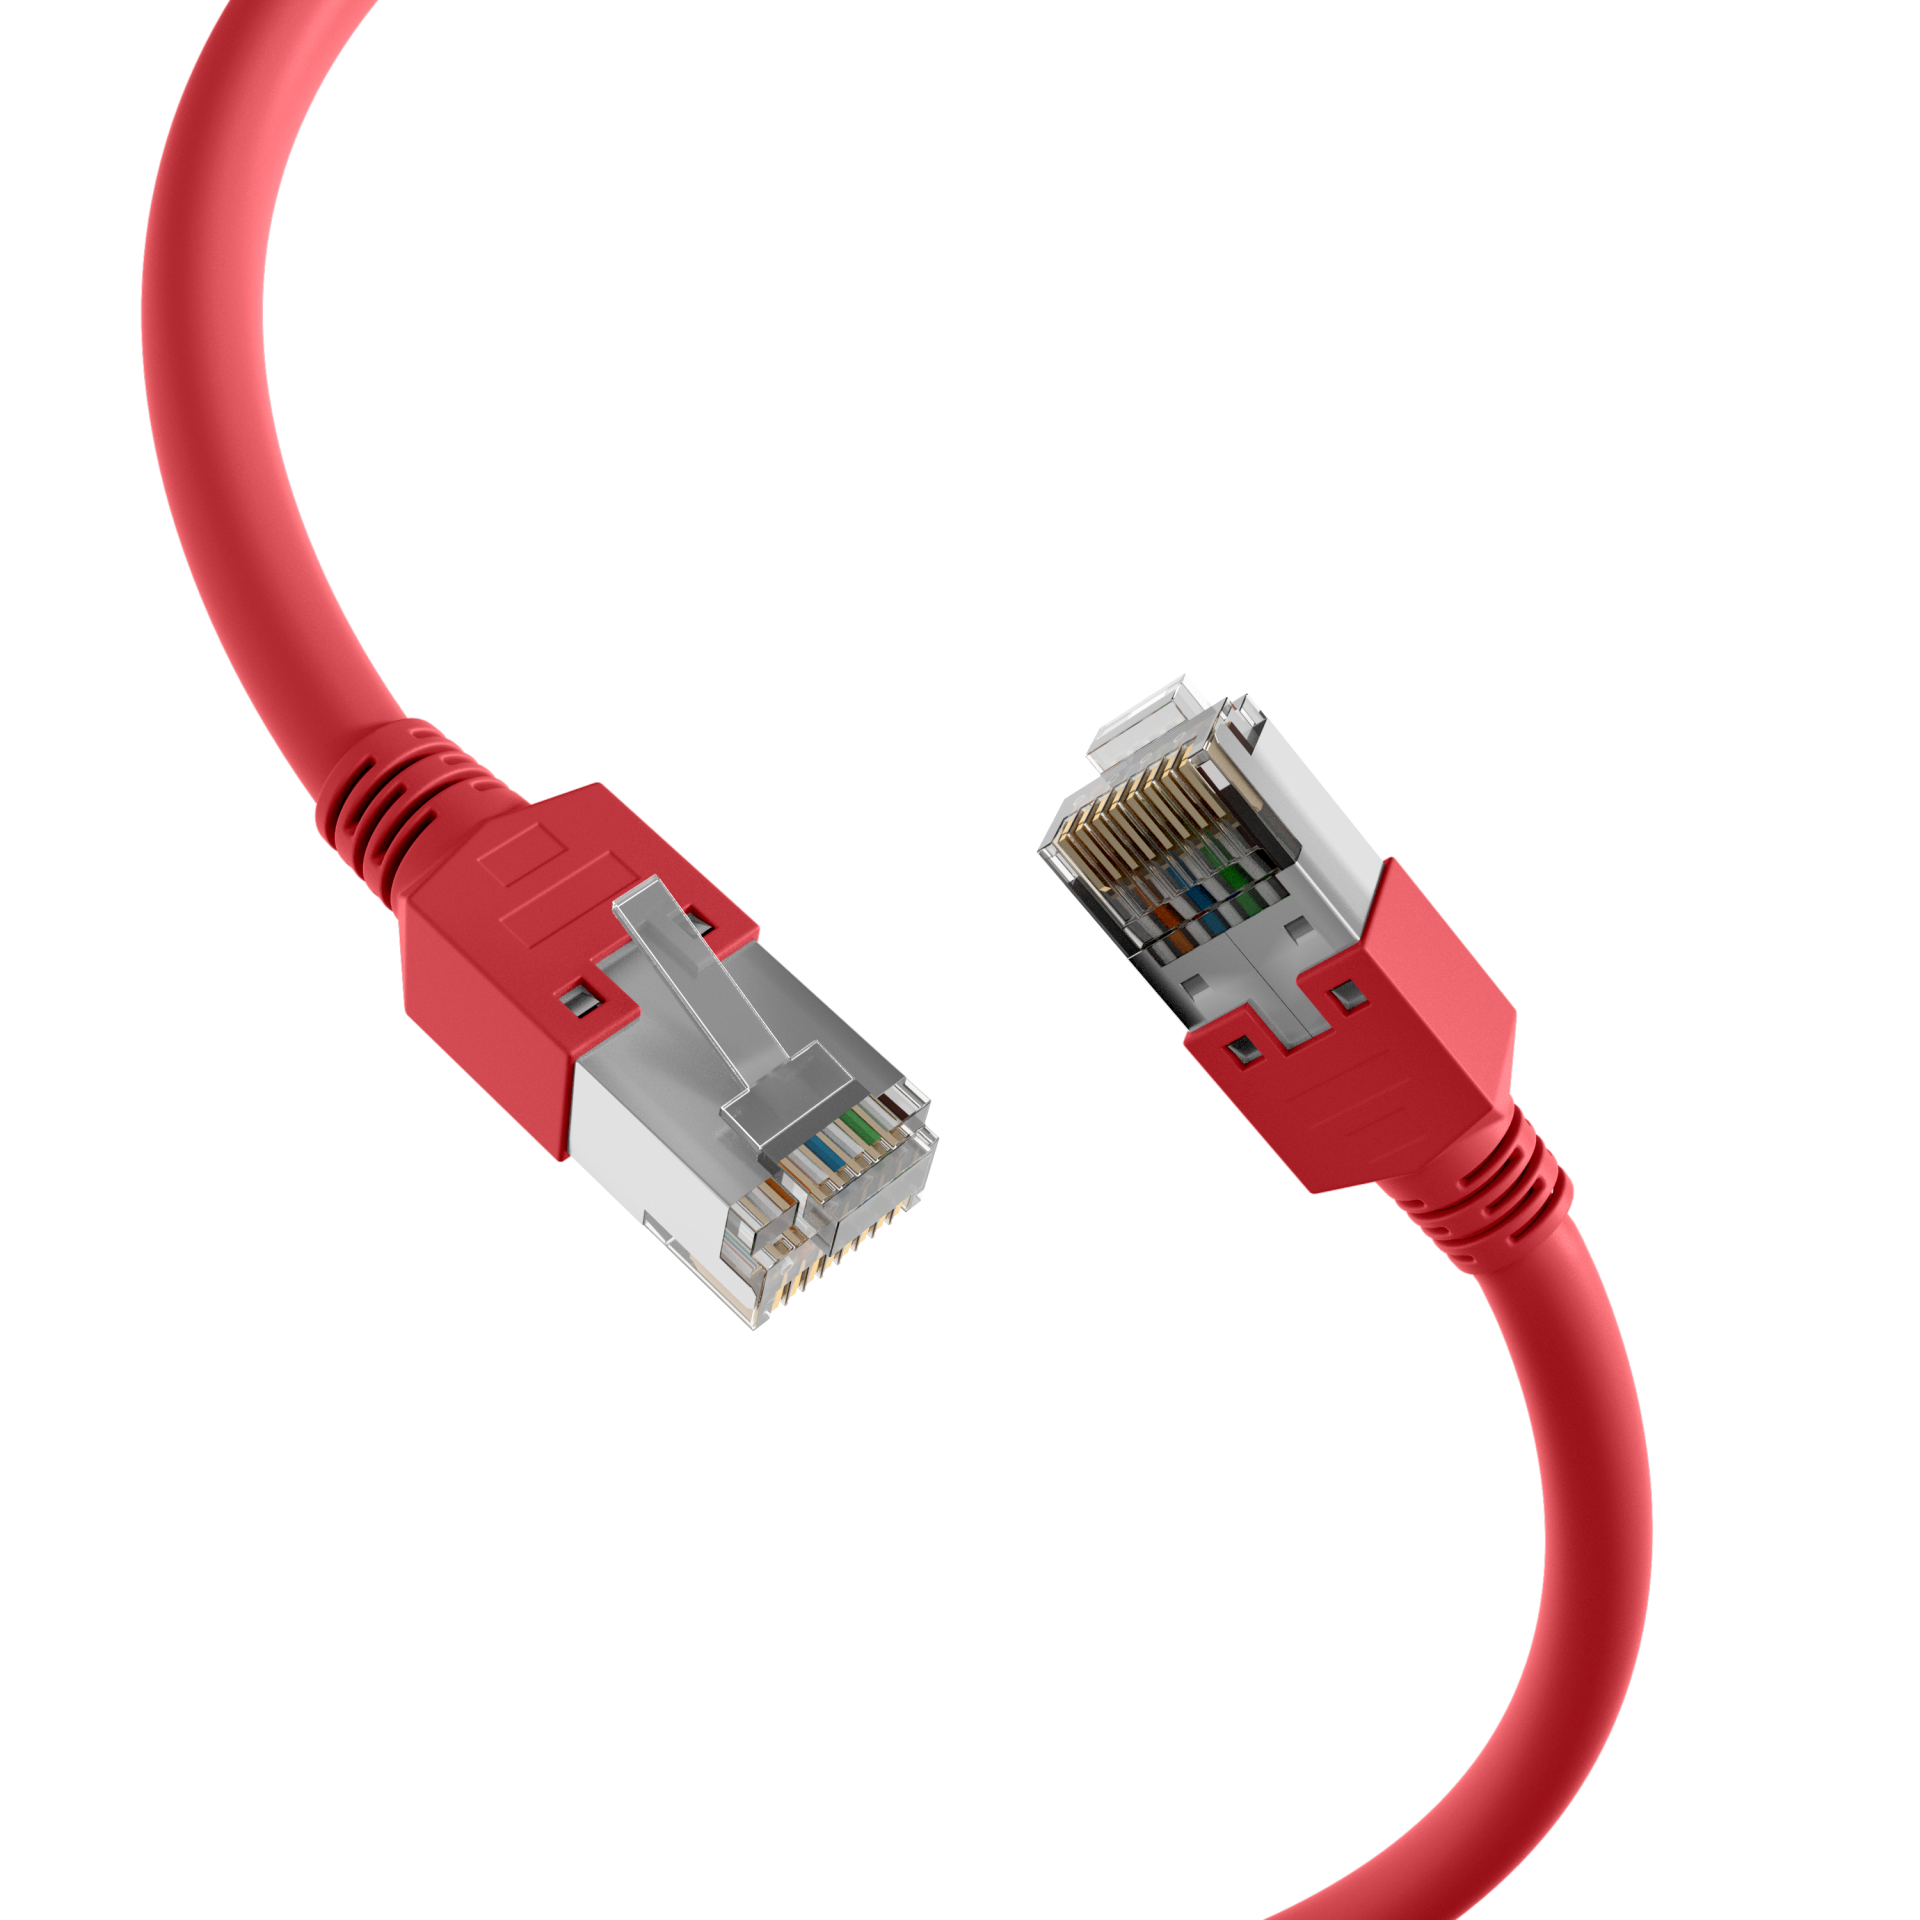 RJ45 Patch Cord Cat.5e S/UTP PVCDätwyler 5502 TM11 red 0,5m